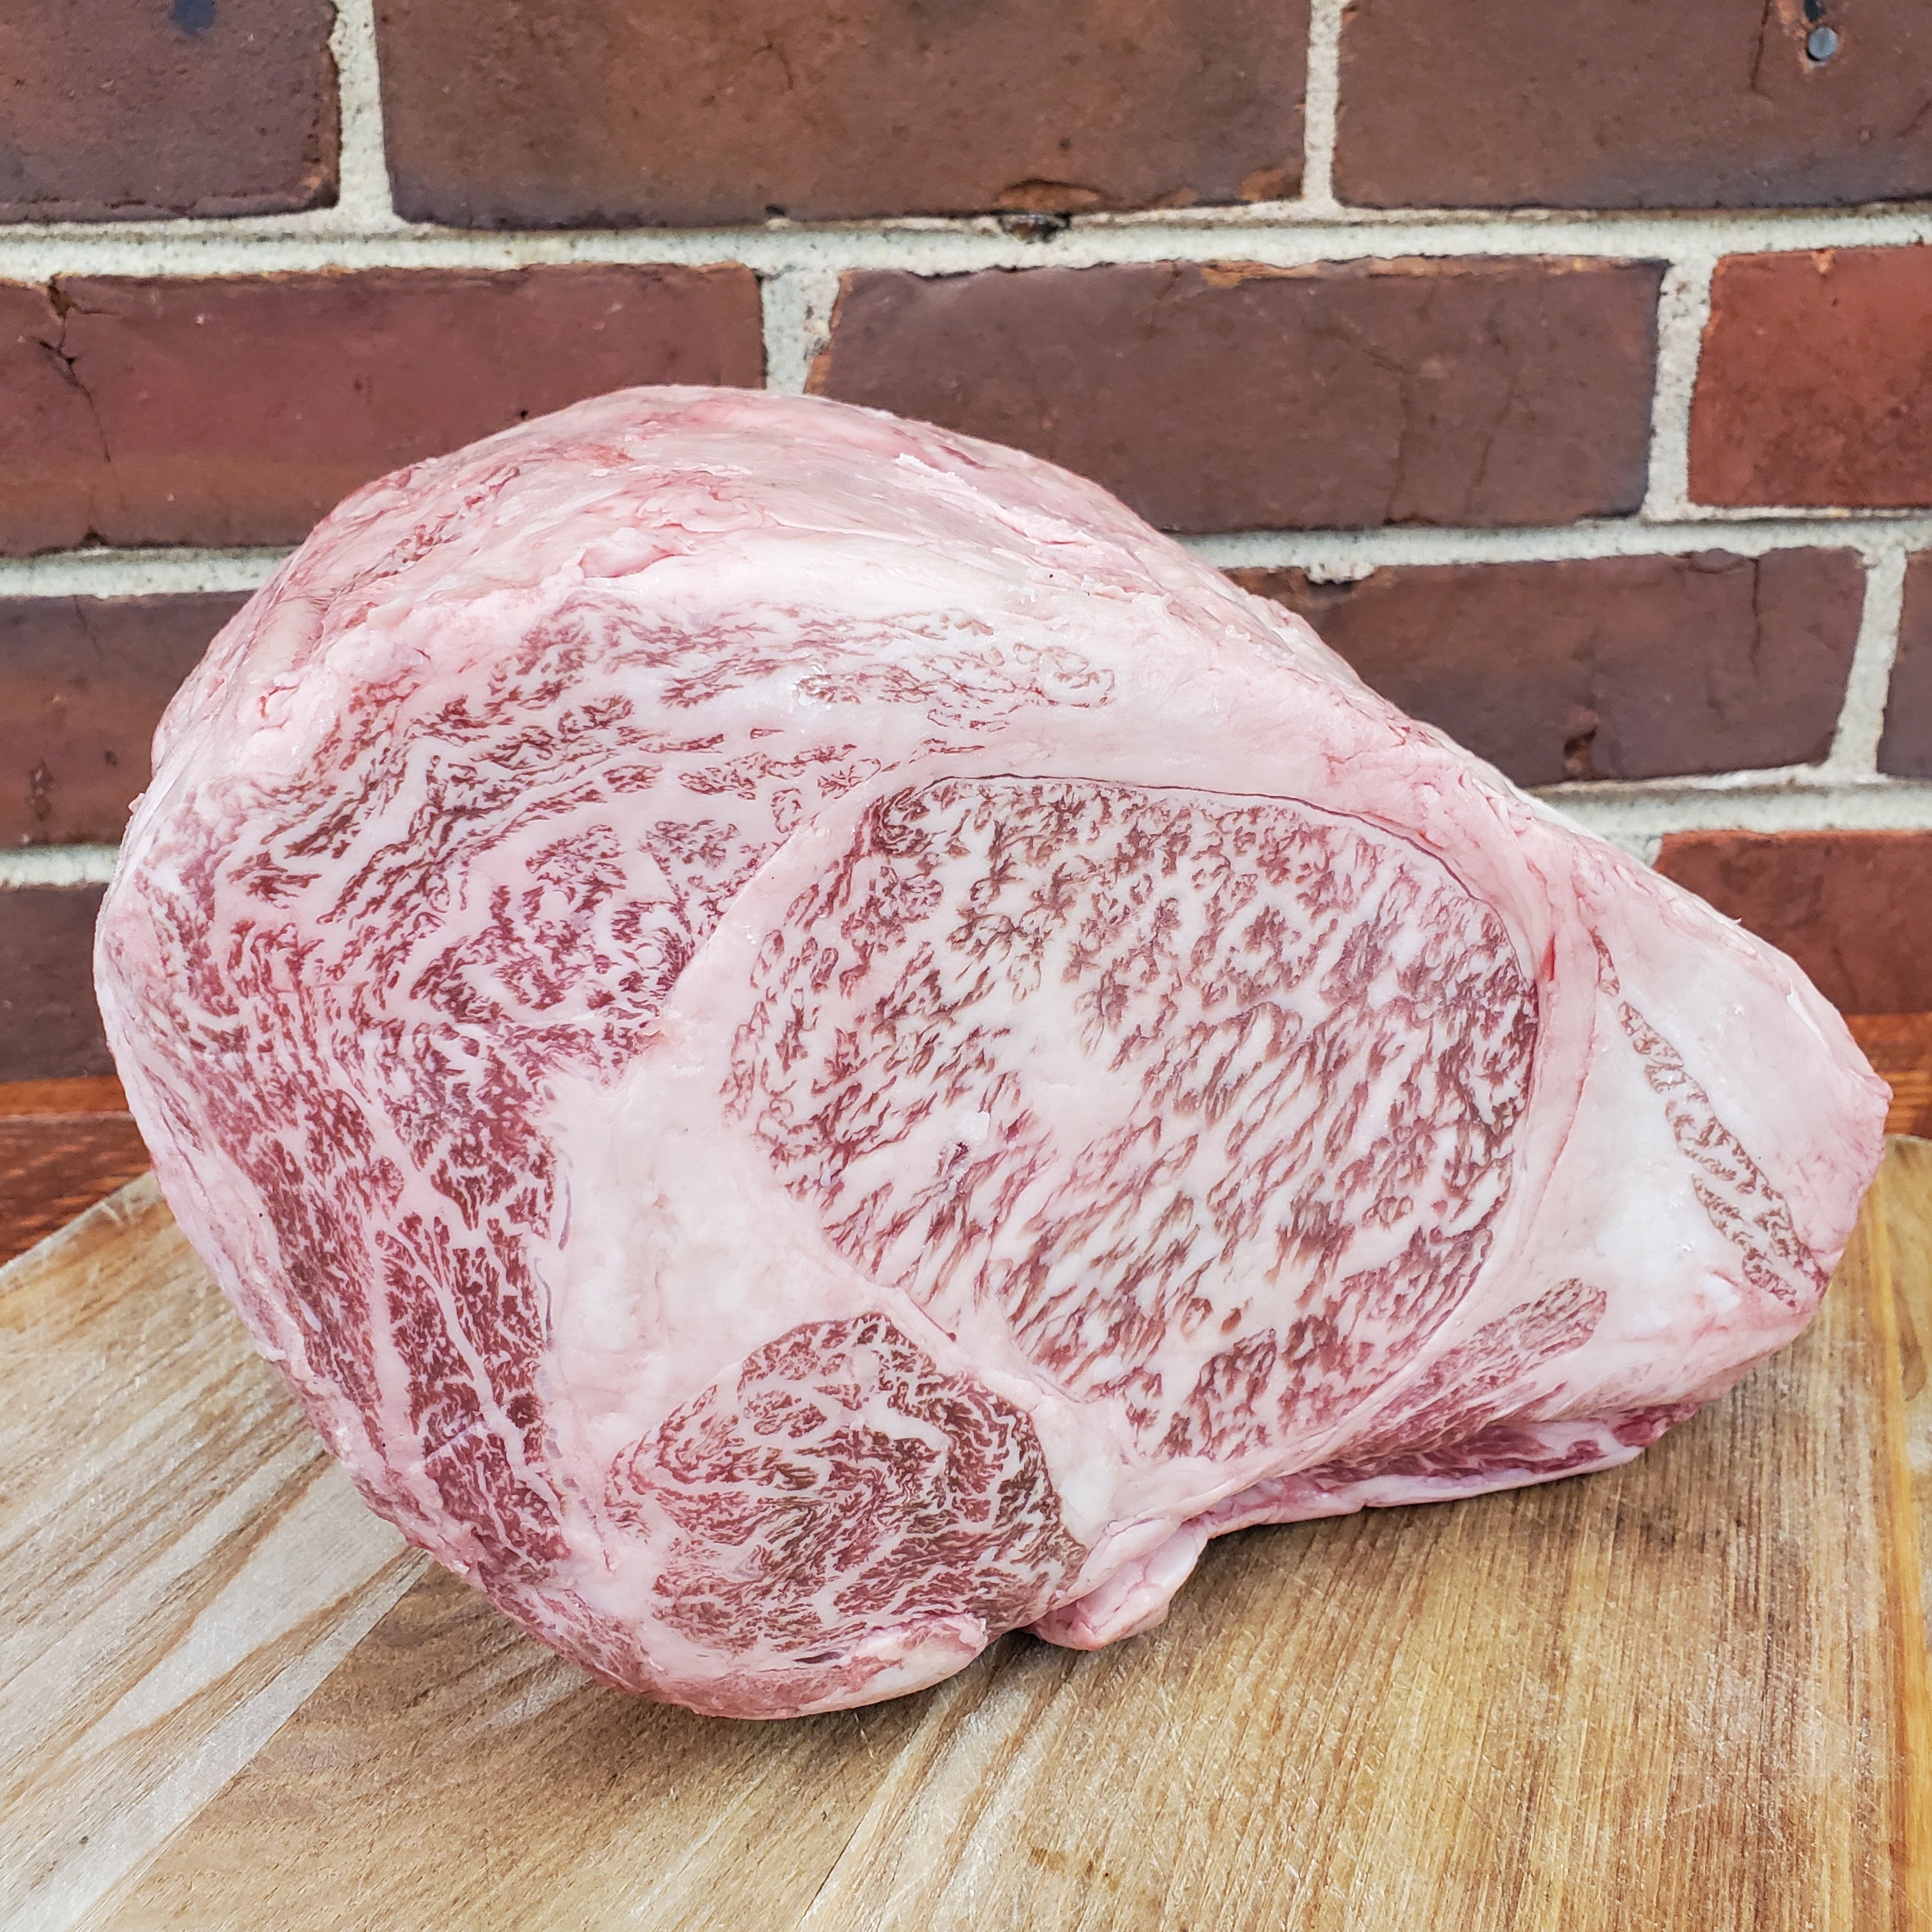 Japanese Wagyu Ribeye - Dad's Going to Love This!!!